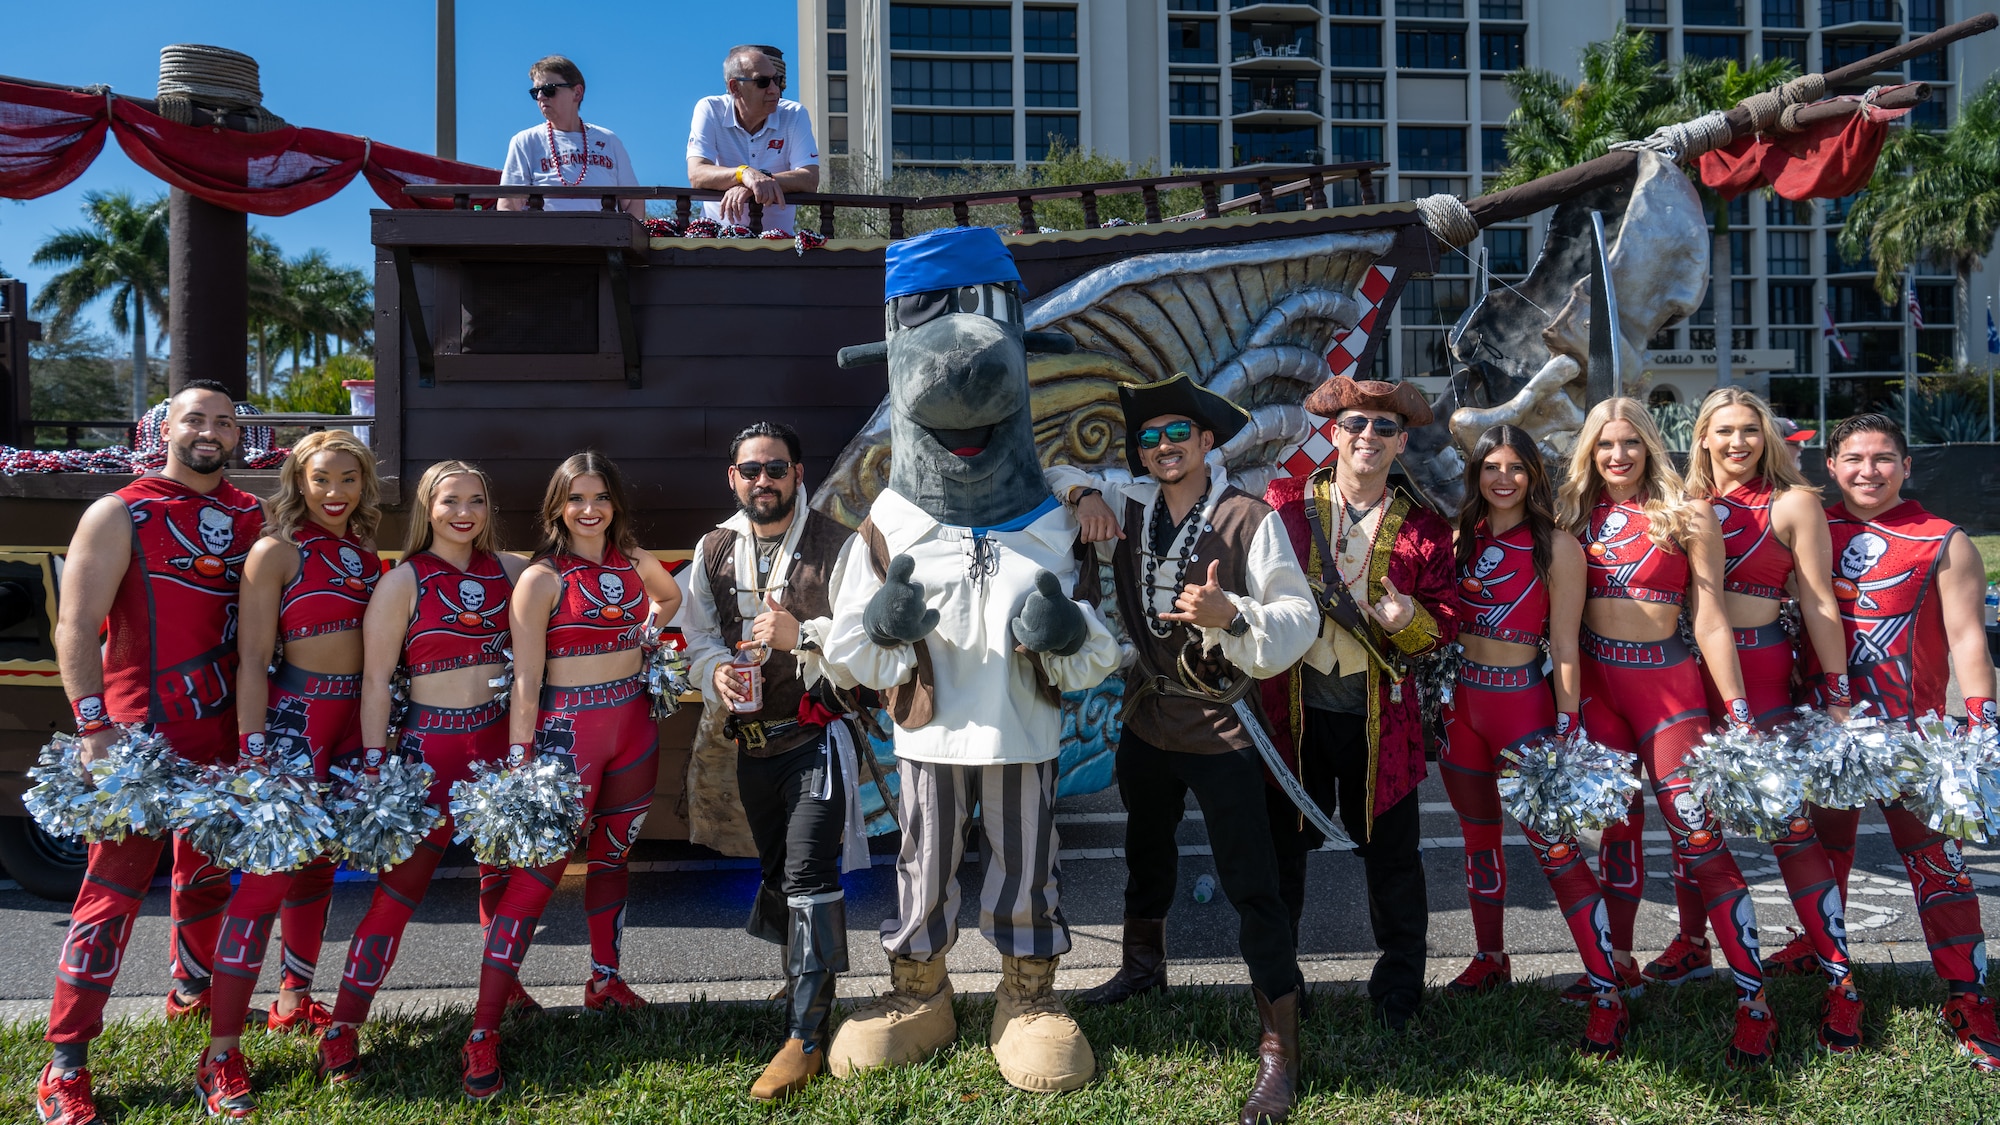 The event is the third largest parade in America and takes place as part of Tampa Bay’s annual Gasparilla Pirate Fest. MacDill contributes a float in celebration of the strong ties between the installation and local community. (U.S. Air Force photo by Senior Airman Zachary Foster)